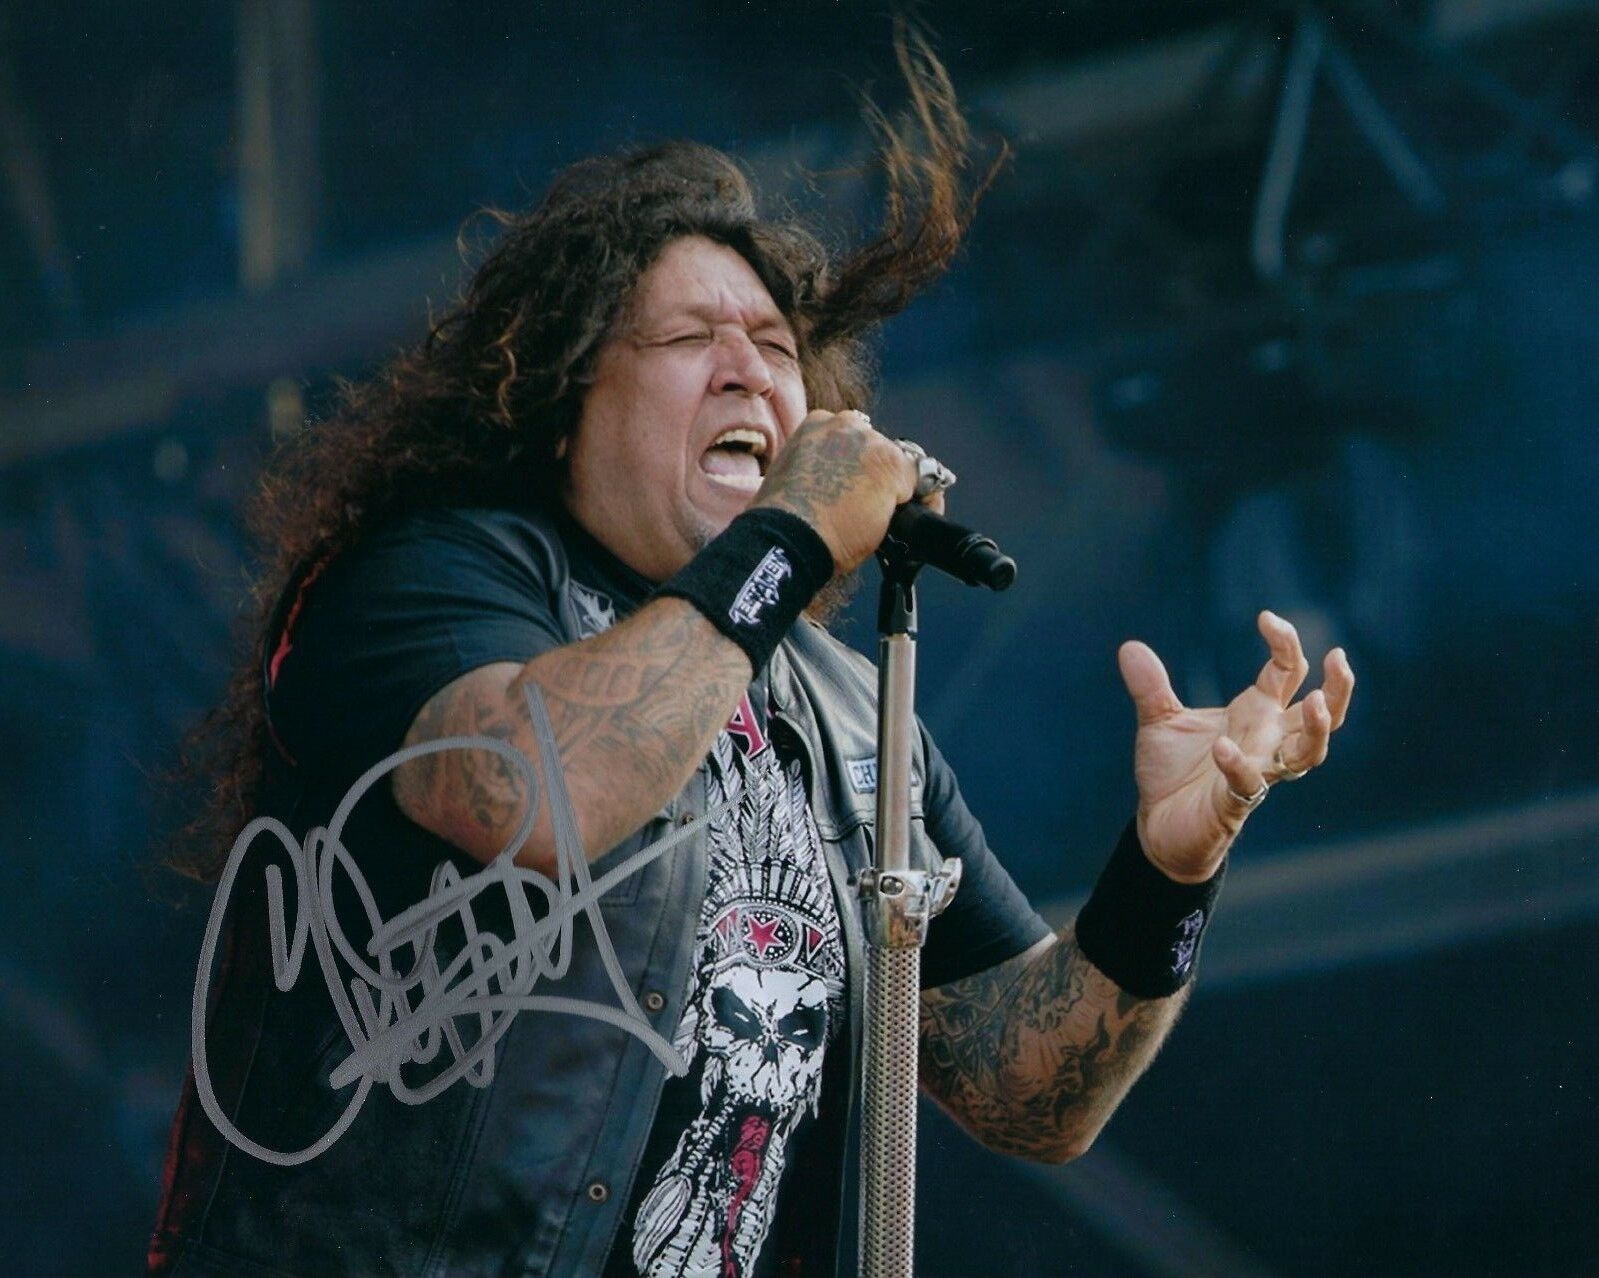 GFA Testament Singer * CHUCK BILLY * Signed Autographed 8x10 Photo Poster painting PROOF C3 COA